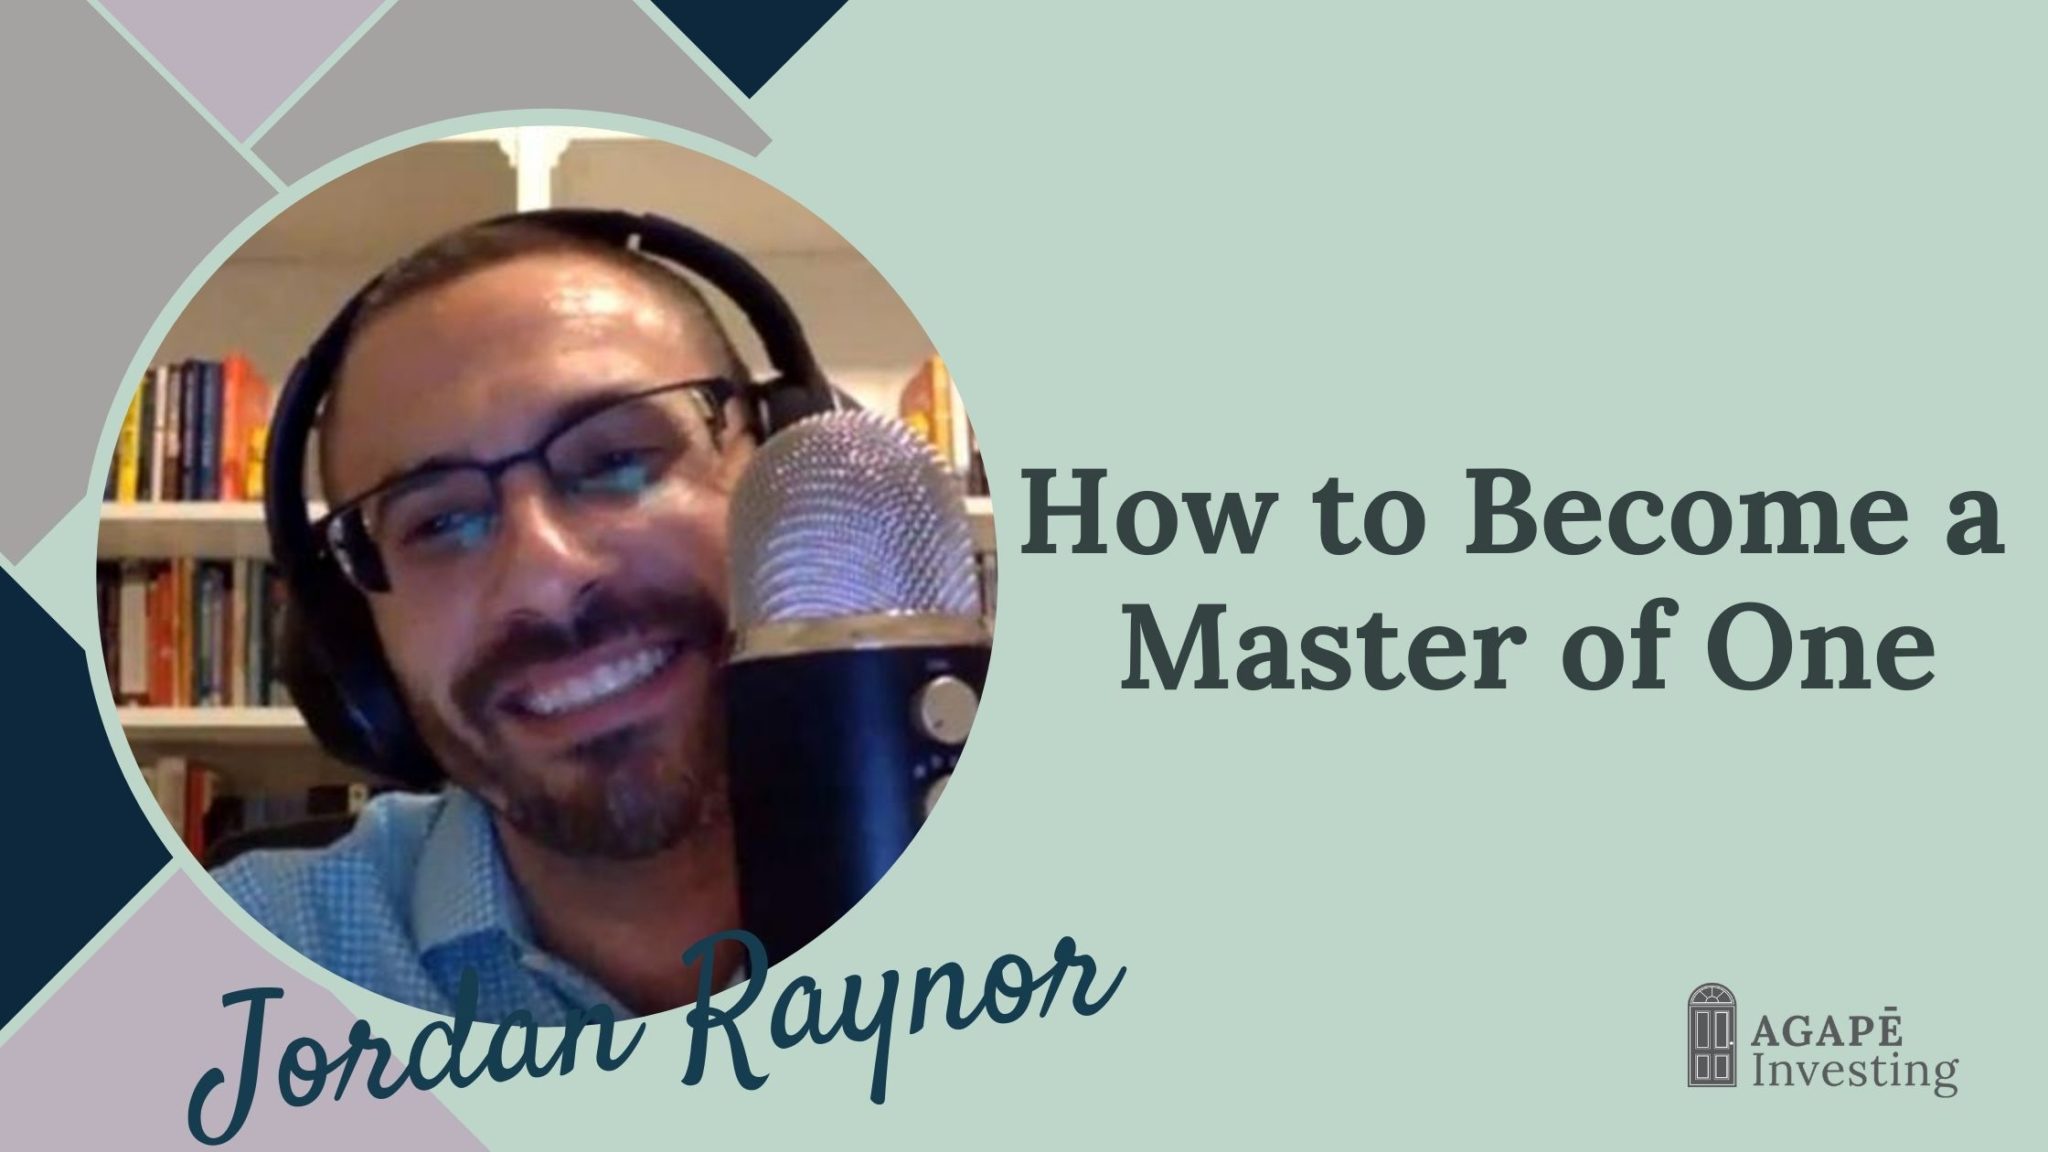 How to Become a Master of One - Jordan Raynor